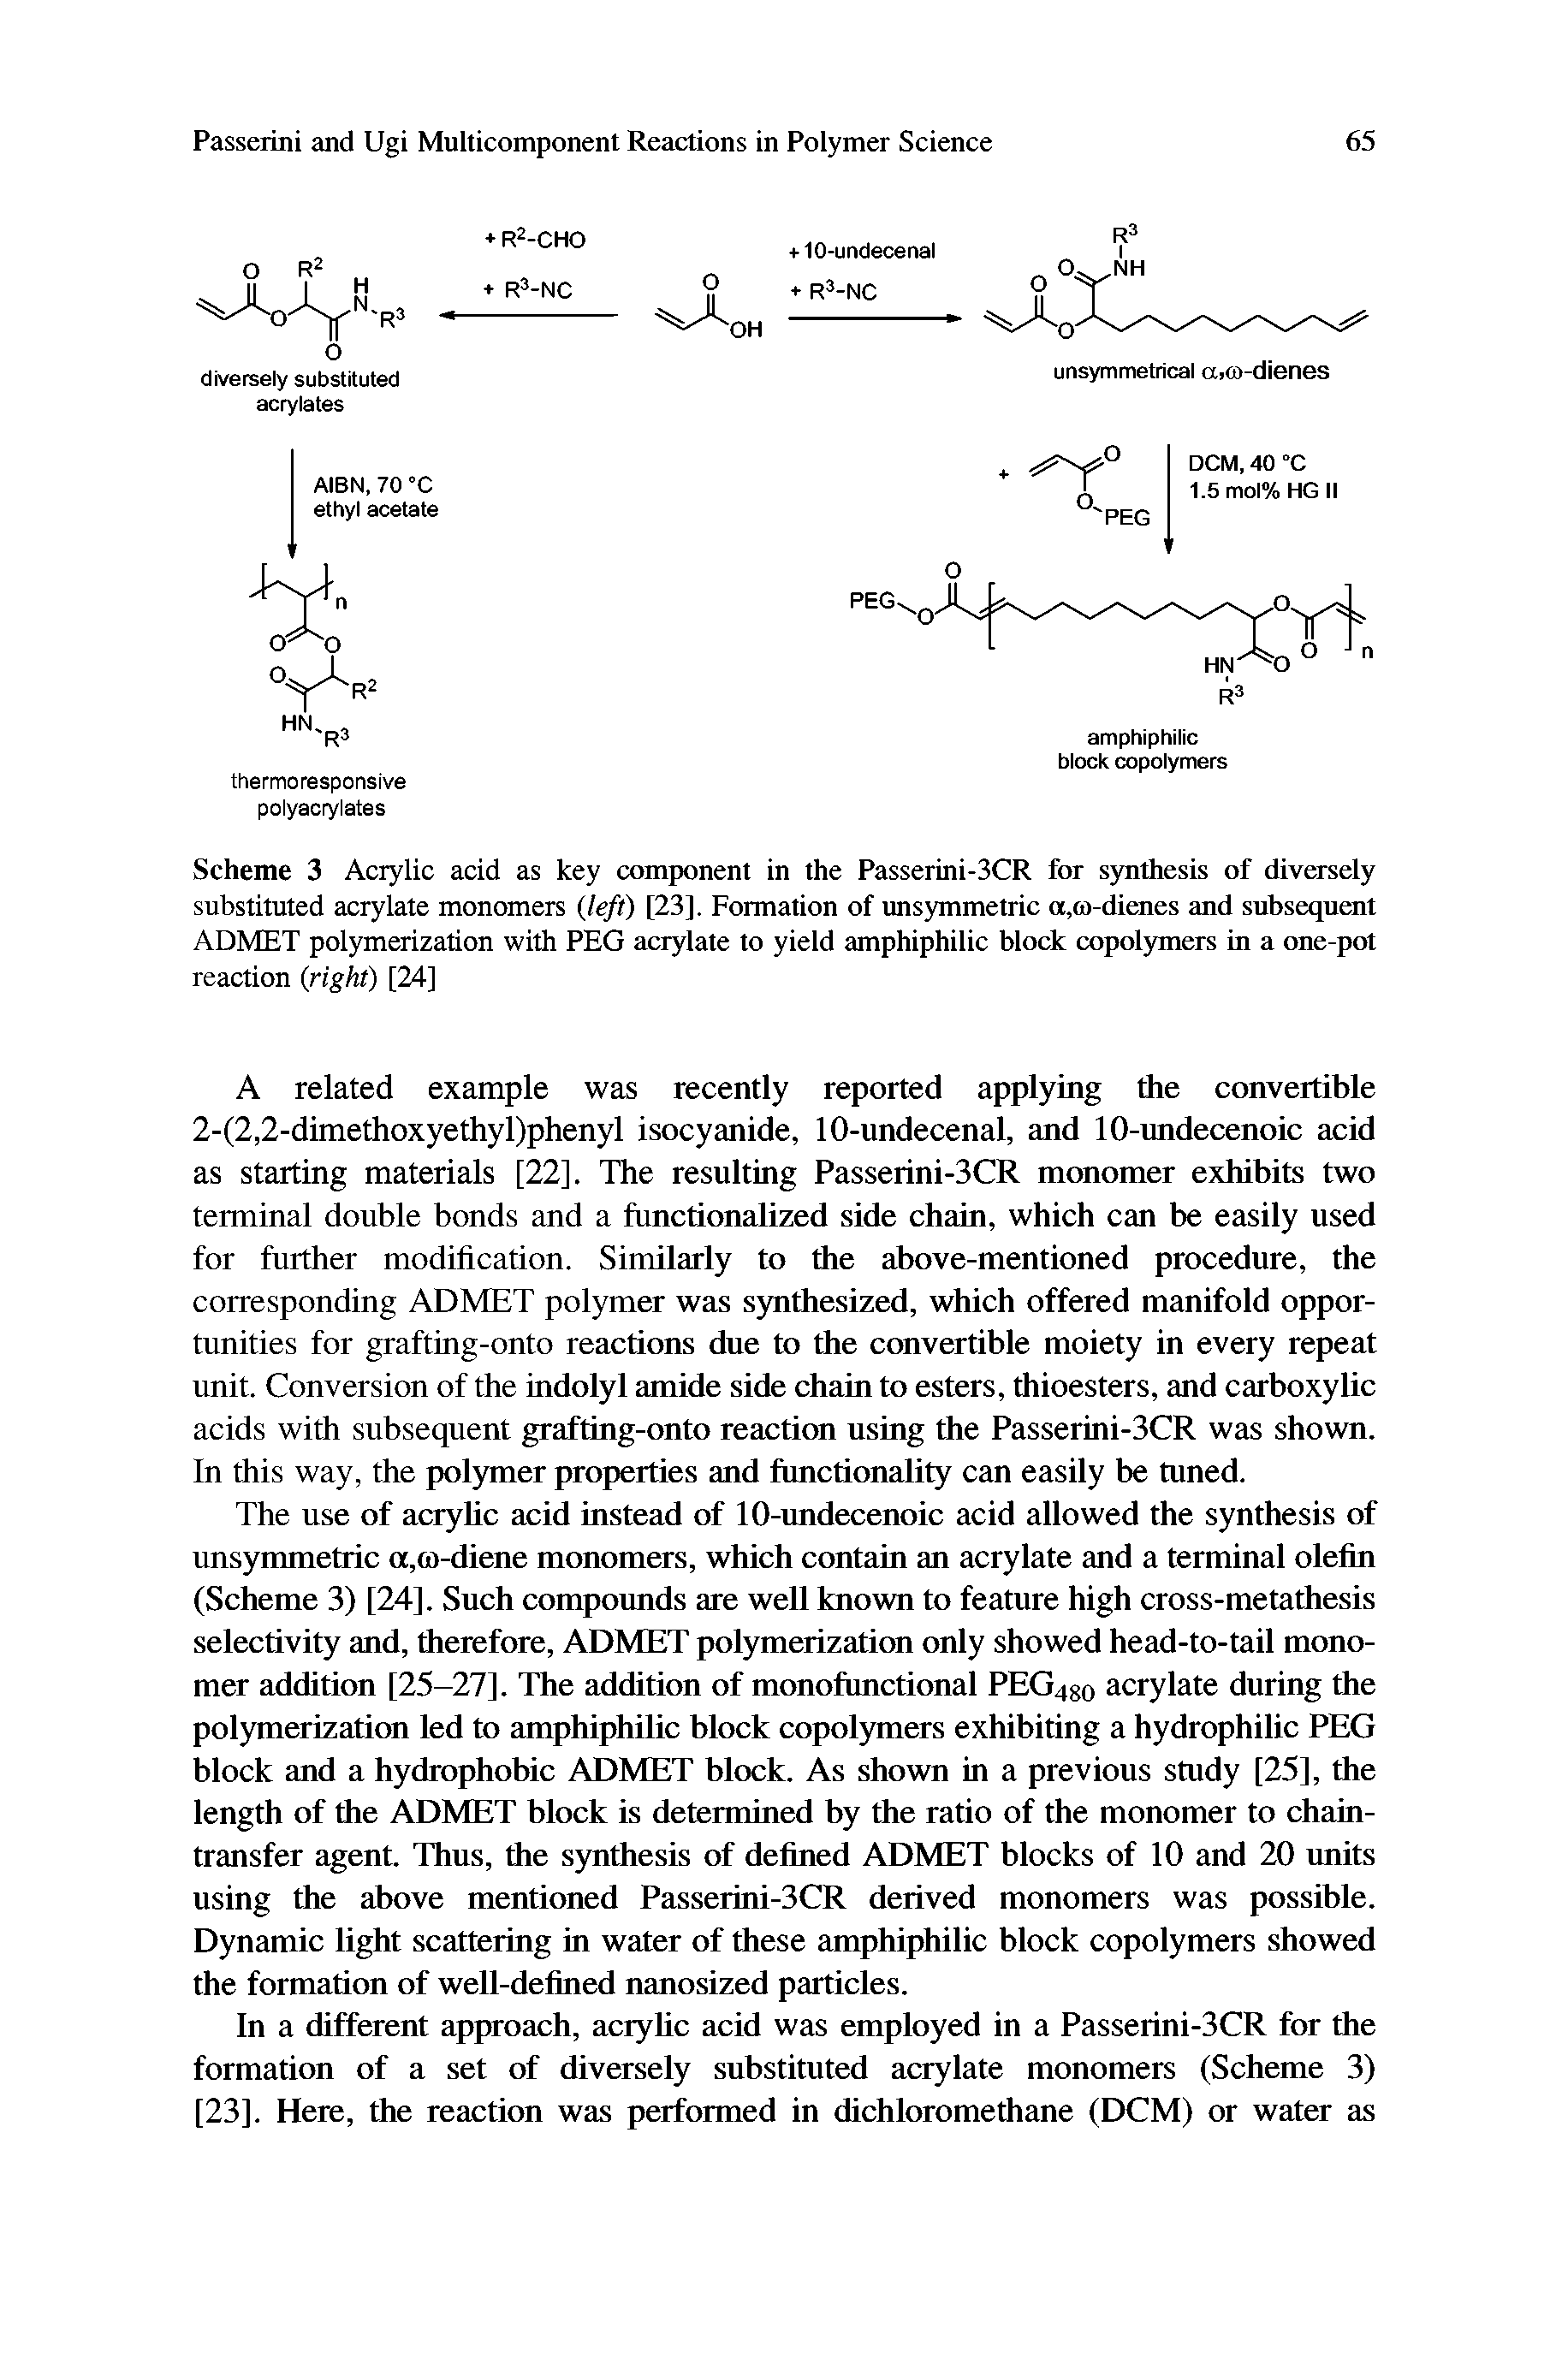 Scheme 3 Acrylic acid as key component in the Passerini-3CR for synthesis of diversely substituted acrylate monomers left) [23]. Formation of unsymmetric a,o)-dienes and subsequent ADMET polymerization with PEG acrylate to yield amphiphilic block copolymers in a one-pot reaction right) [24]...